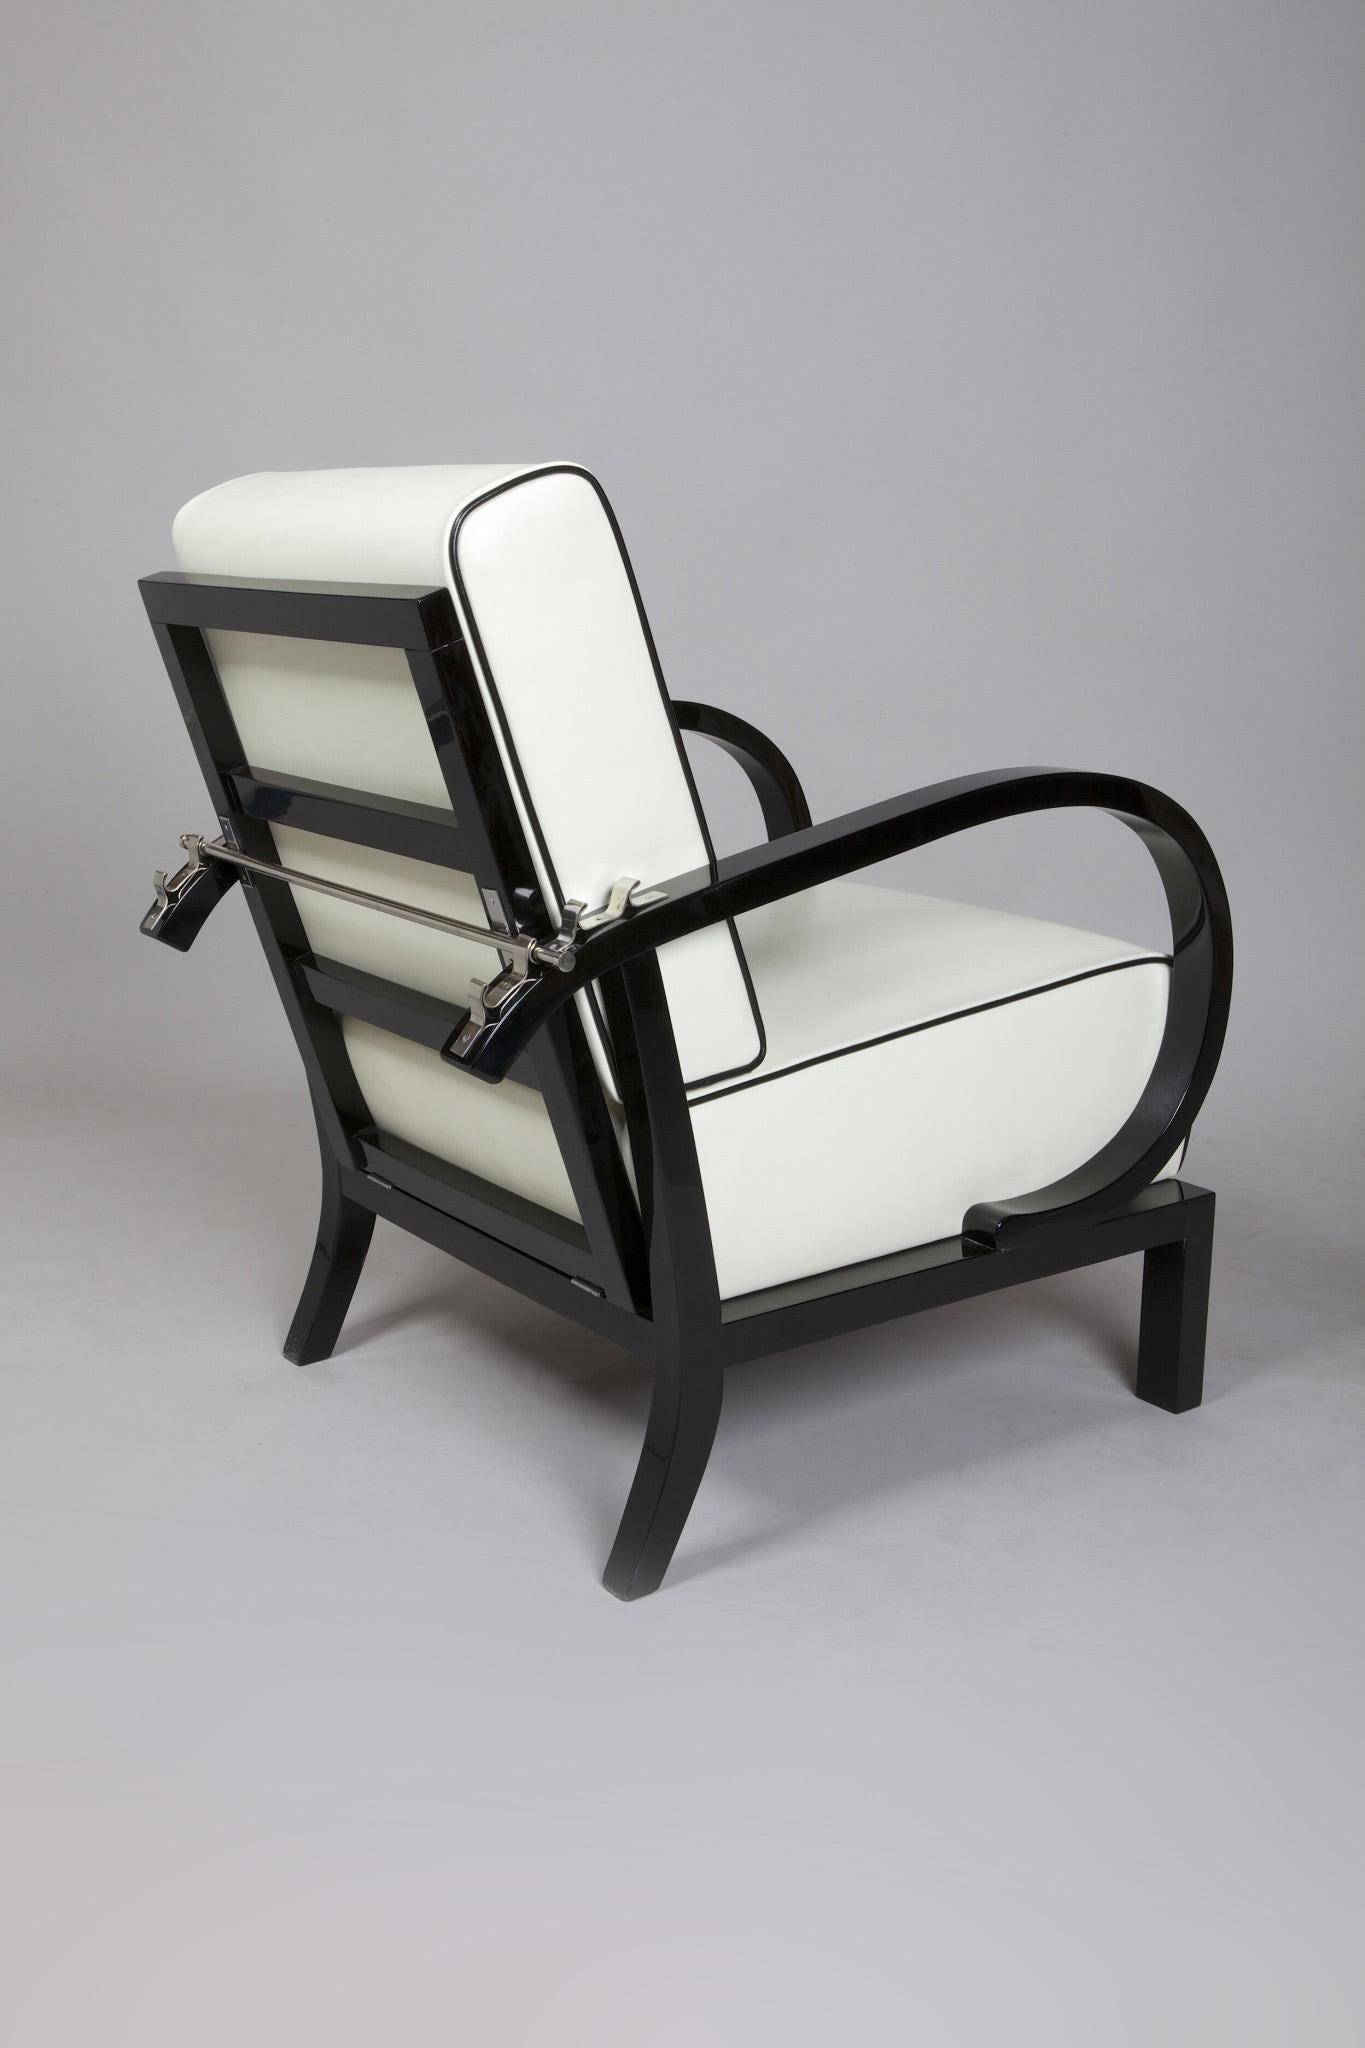 Pair of White Functionalism Armchairs from Czechoslovakia by Jindrich Halabala In Good Condition For Sale In Horomerice, CZ